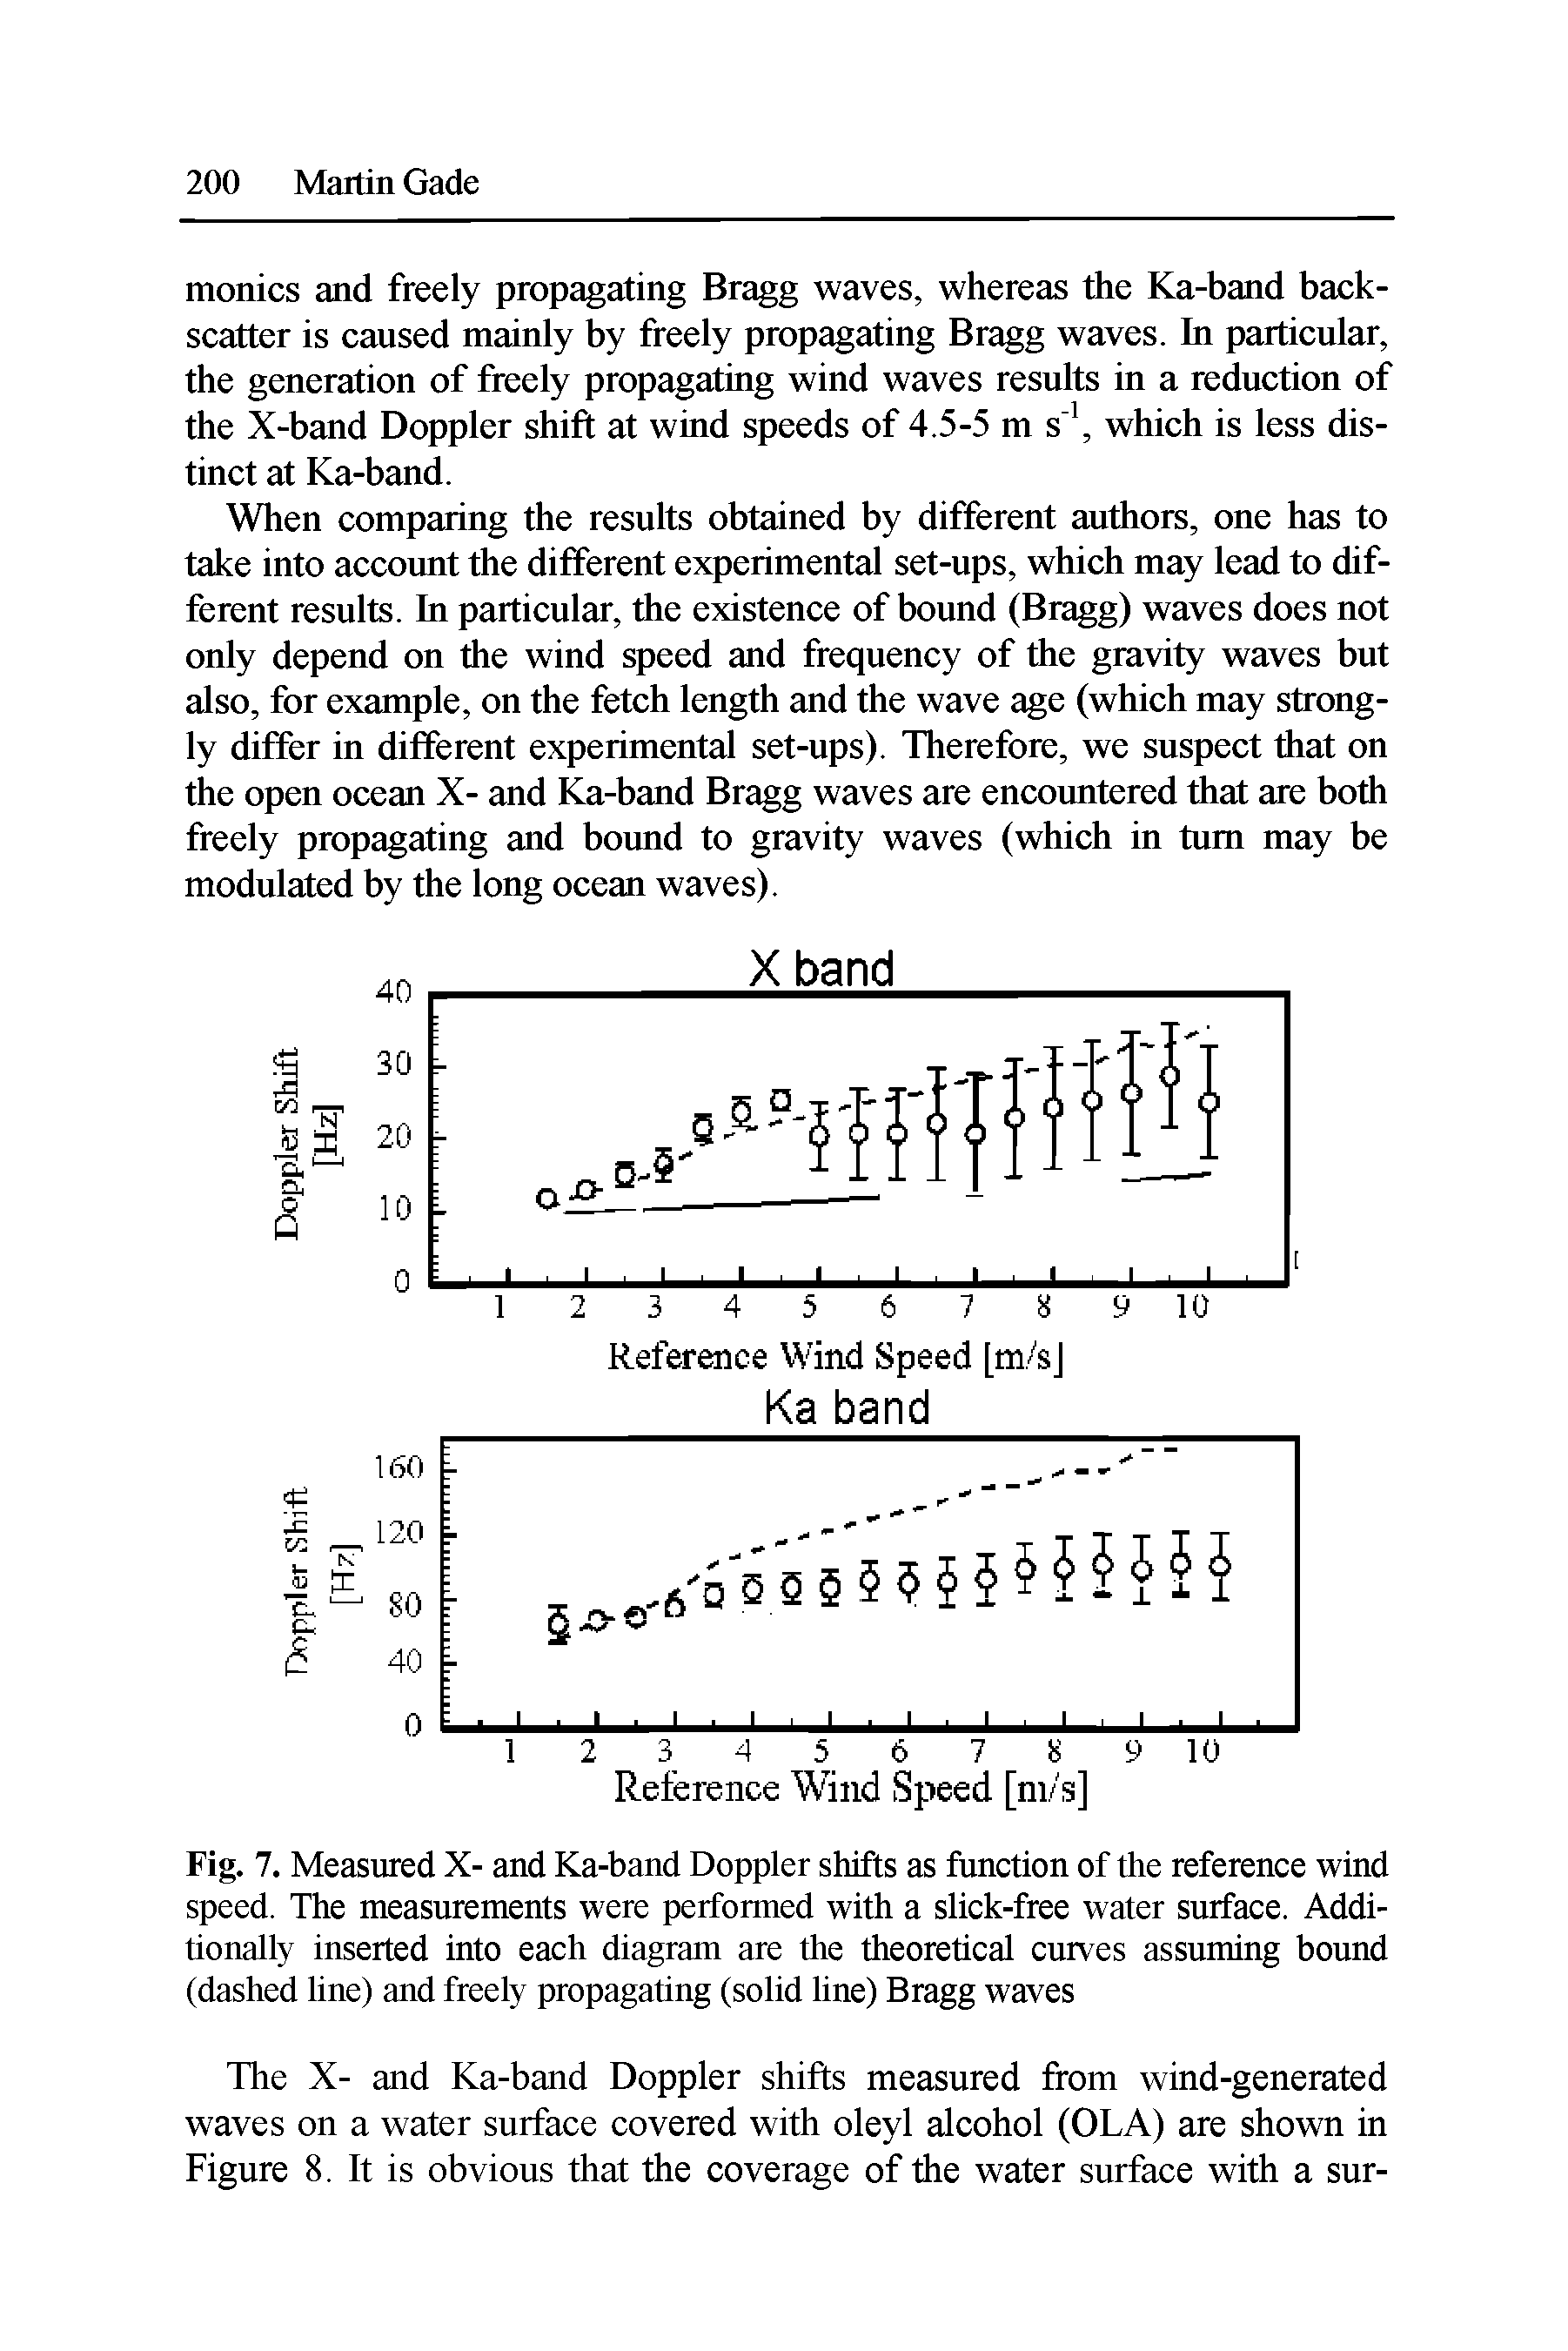 Fig. 7. Measured X- and Ka-band Doppler shifts as function of the reference wind speed. The measurements were performed with a slick-free water surface. Additionally inserted into each diagram are the theoretical curves assuming bound (dashed line) and freely propagating (solid line) Bragg waves...